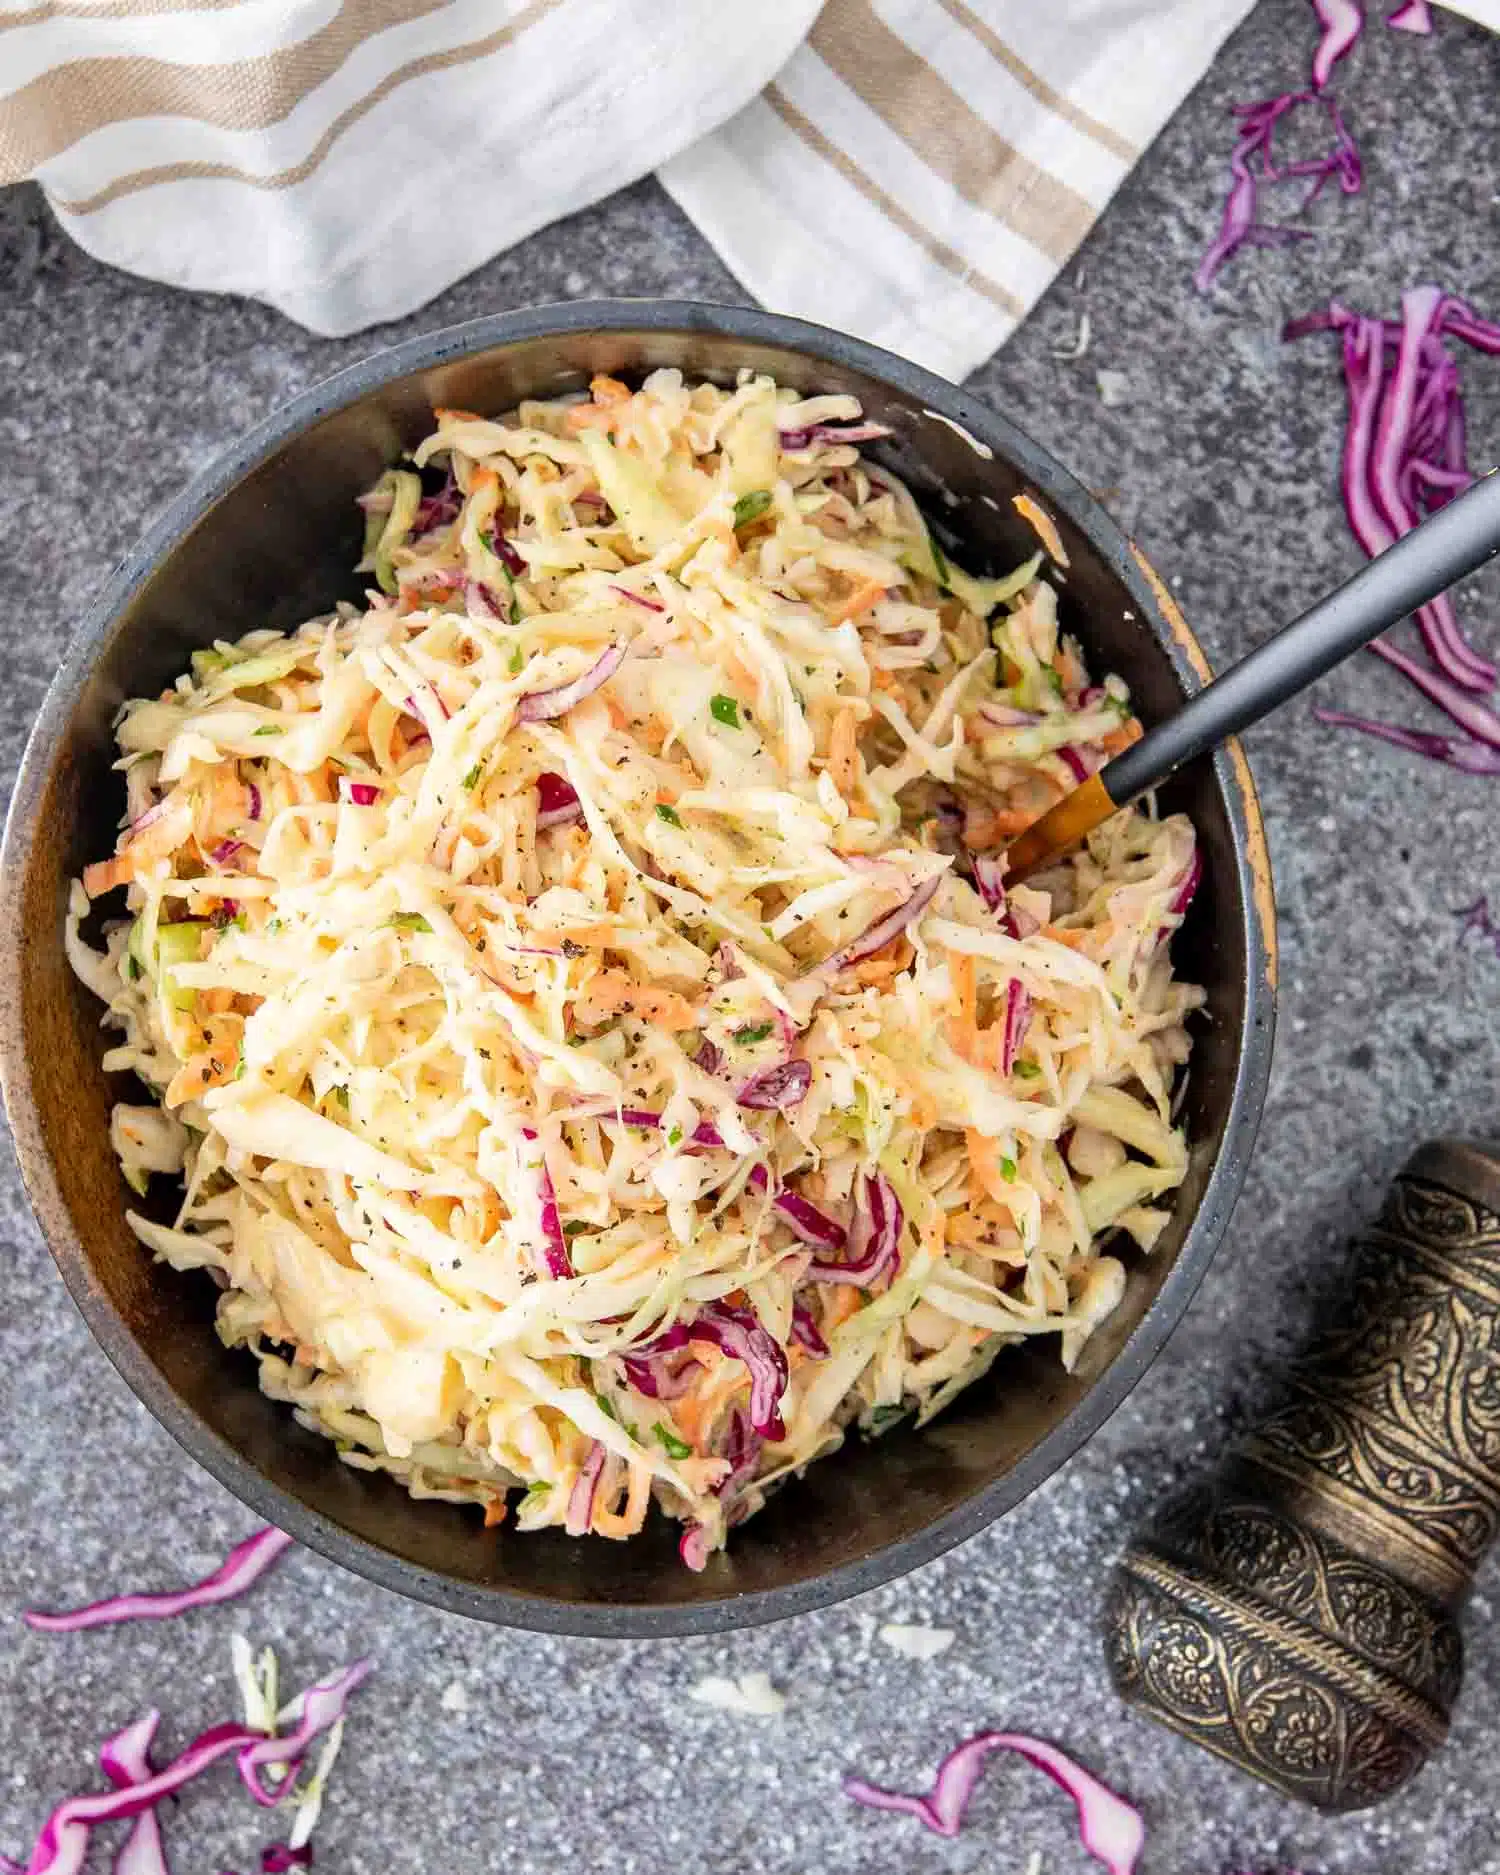 a serving of freshly made coleslaw in a brown bowl.